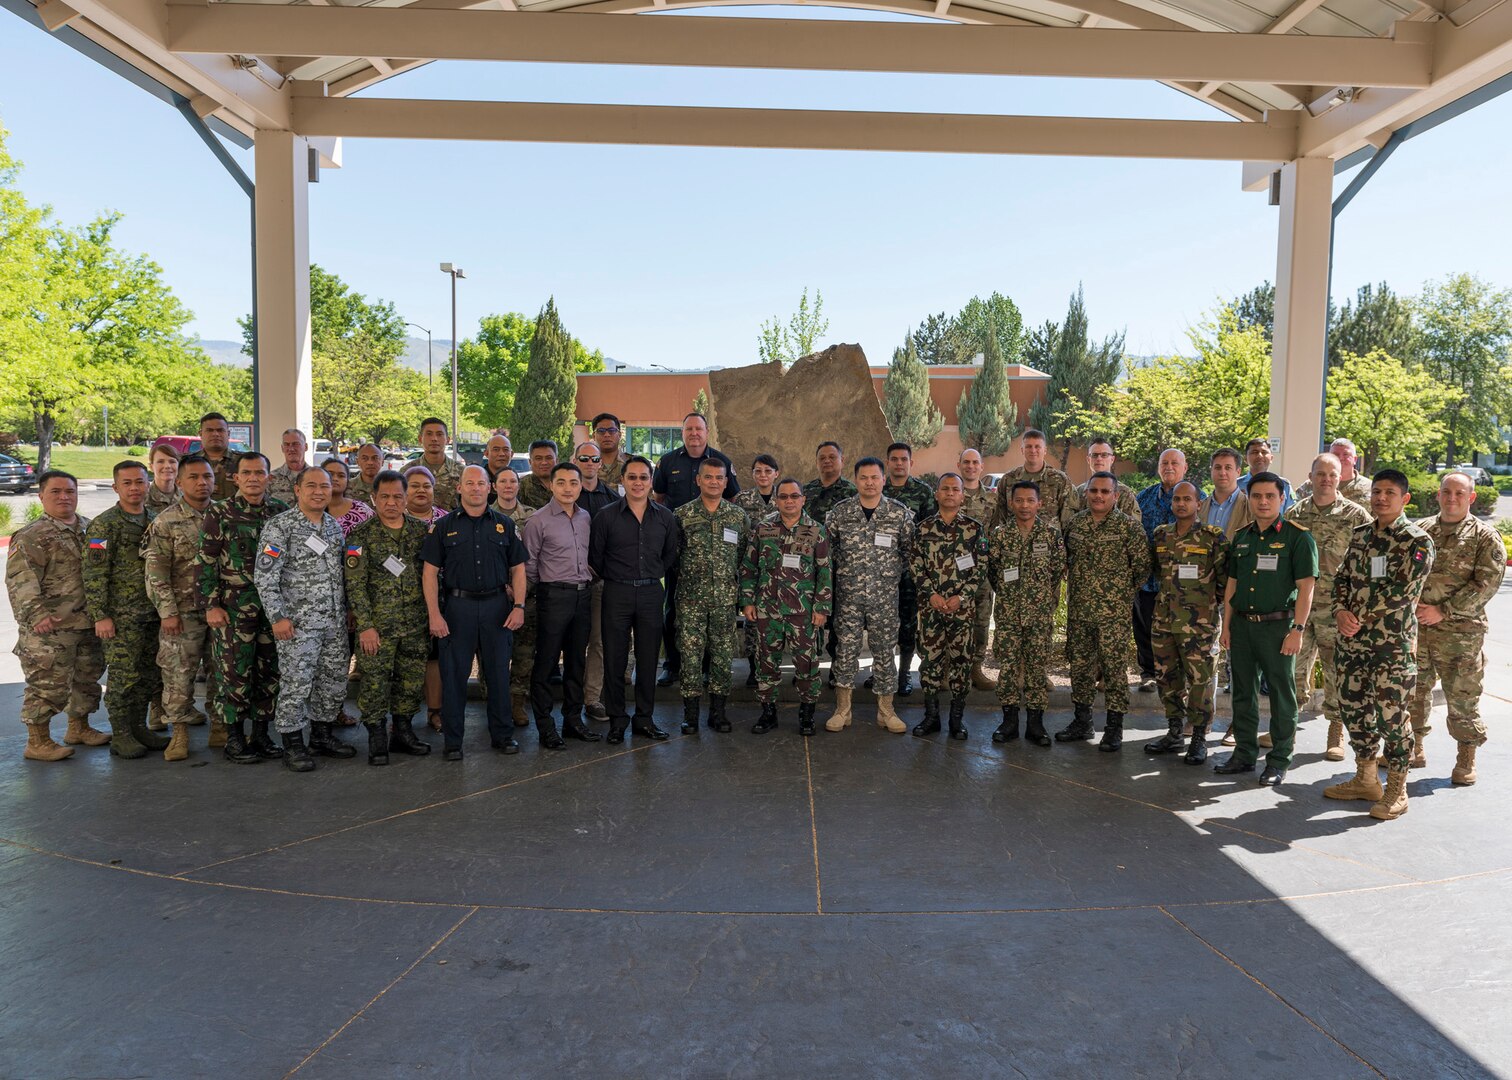 Attendees of the Humanitarian Assistance / Disaster Response seminar held in Boise, Idaho pose for a group photo May 8, 2018.